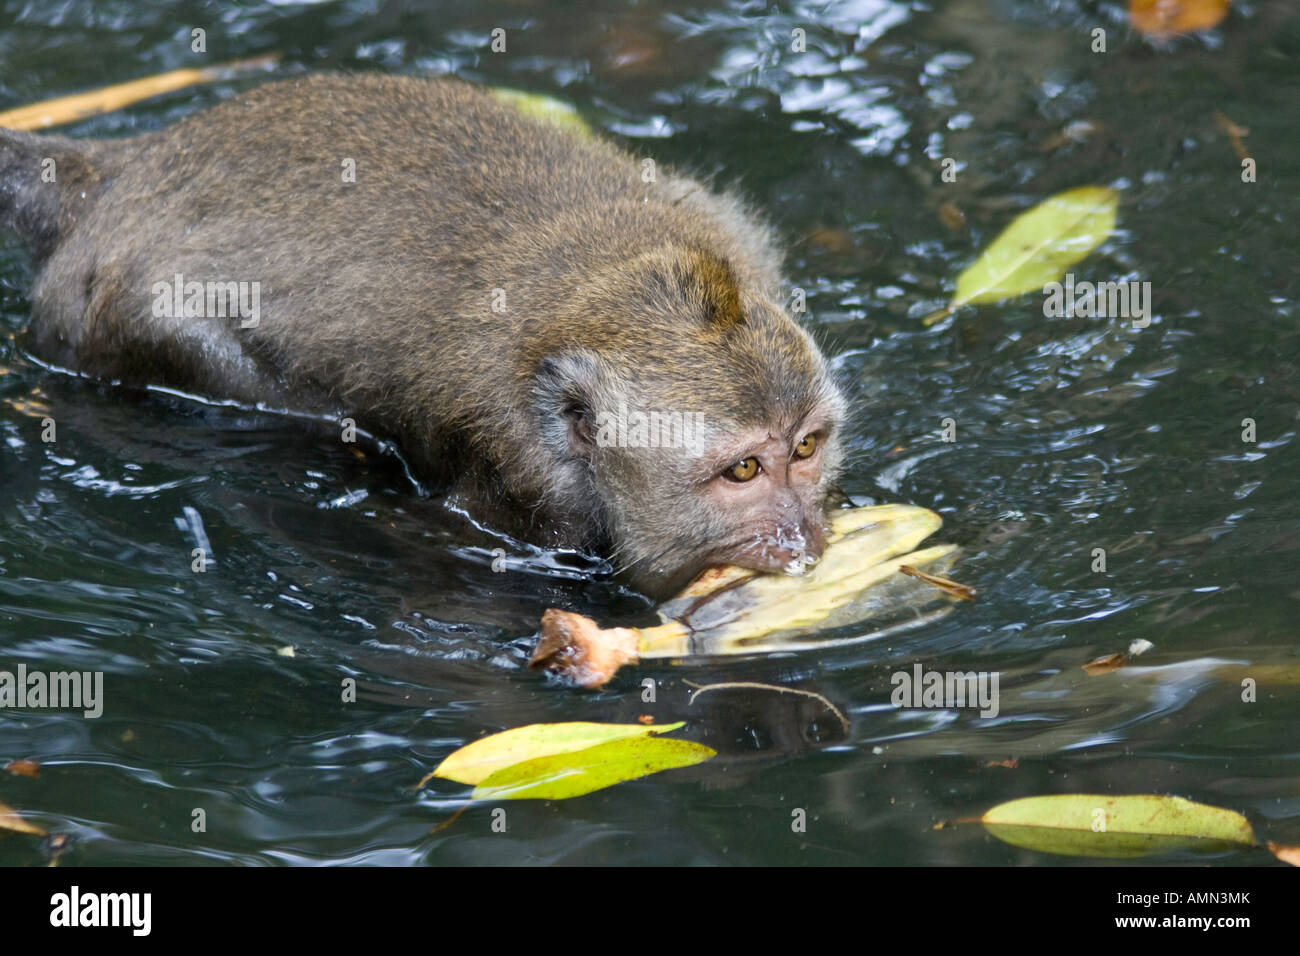 Swimming with Banana Long Tailed Macaques Macaca Fascicularis Monkey Forest Ubud Bali Indonesia Stock Photo